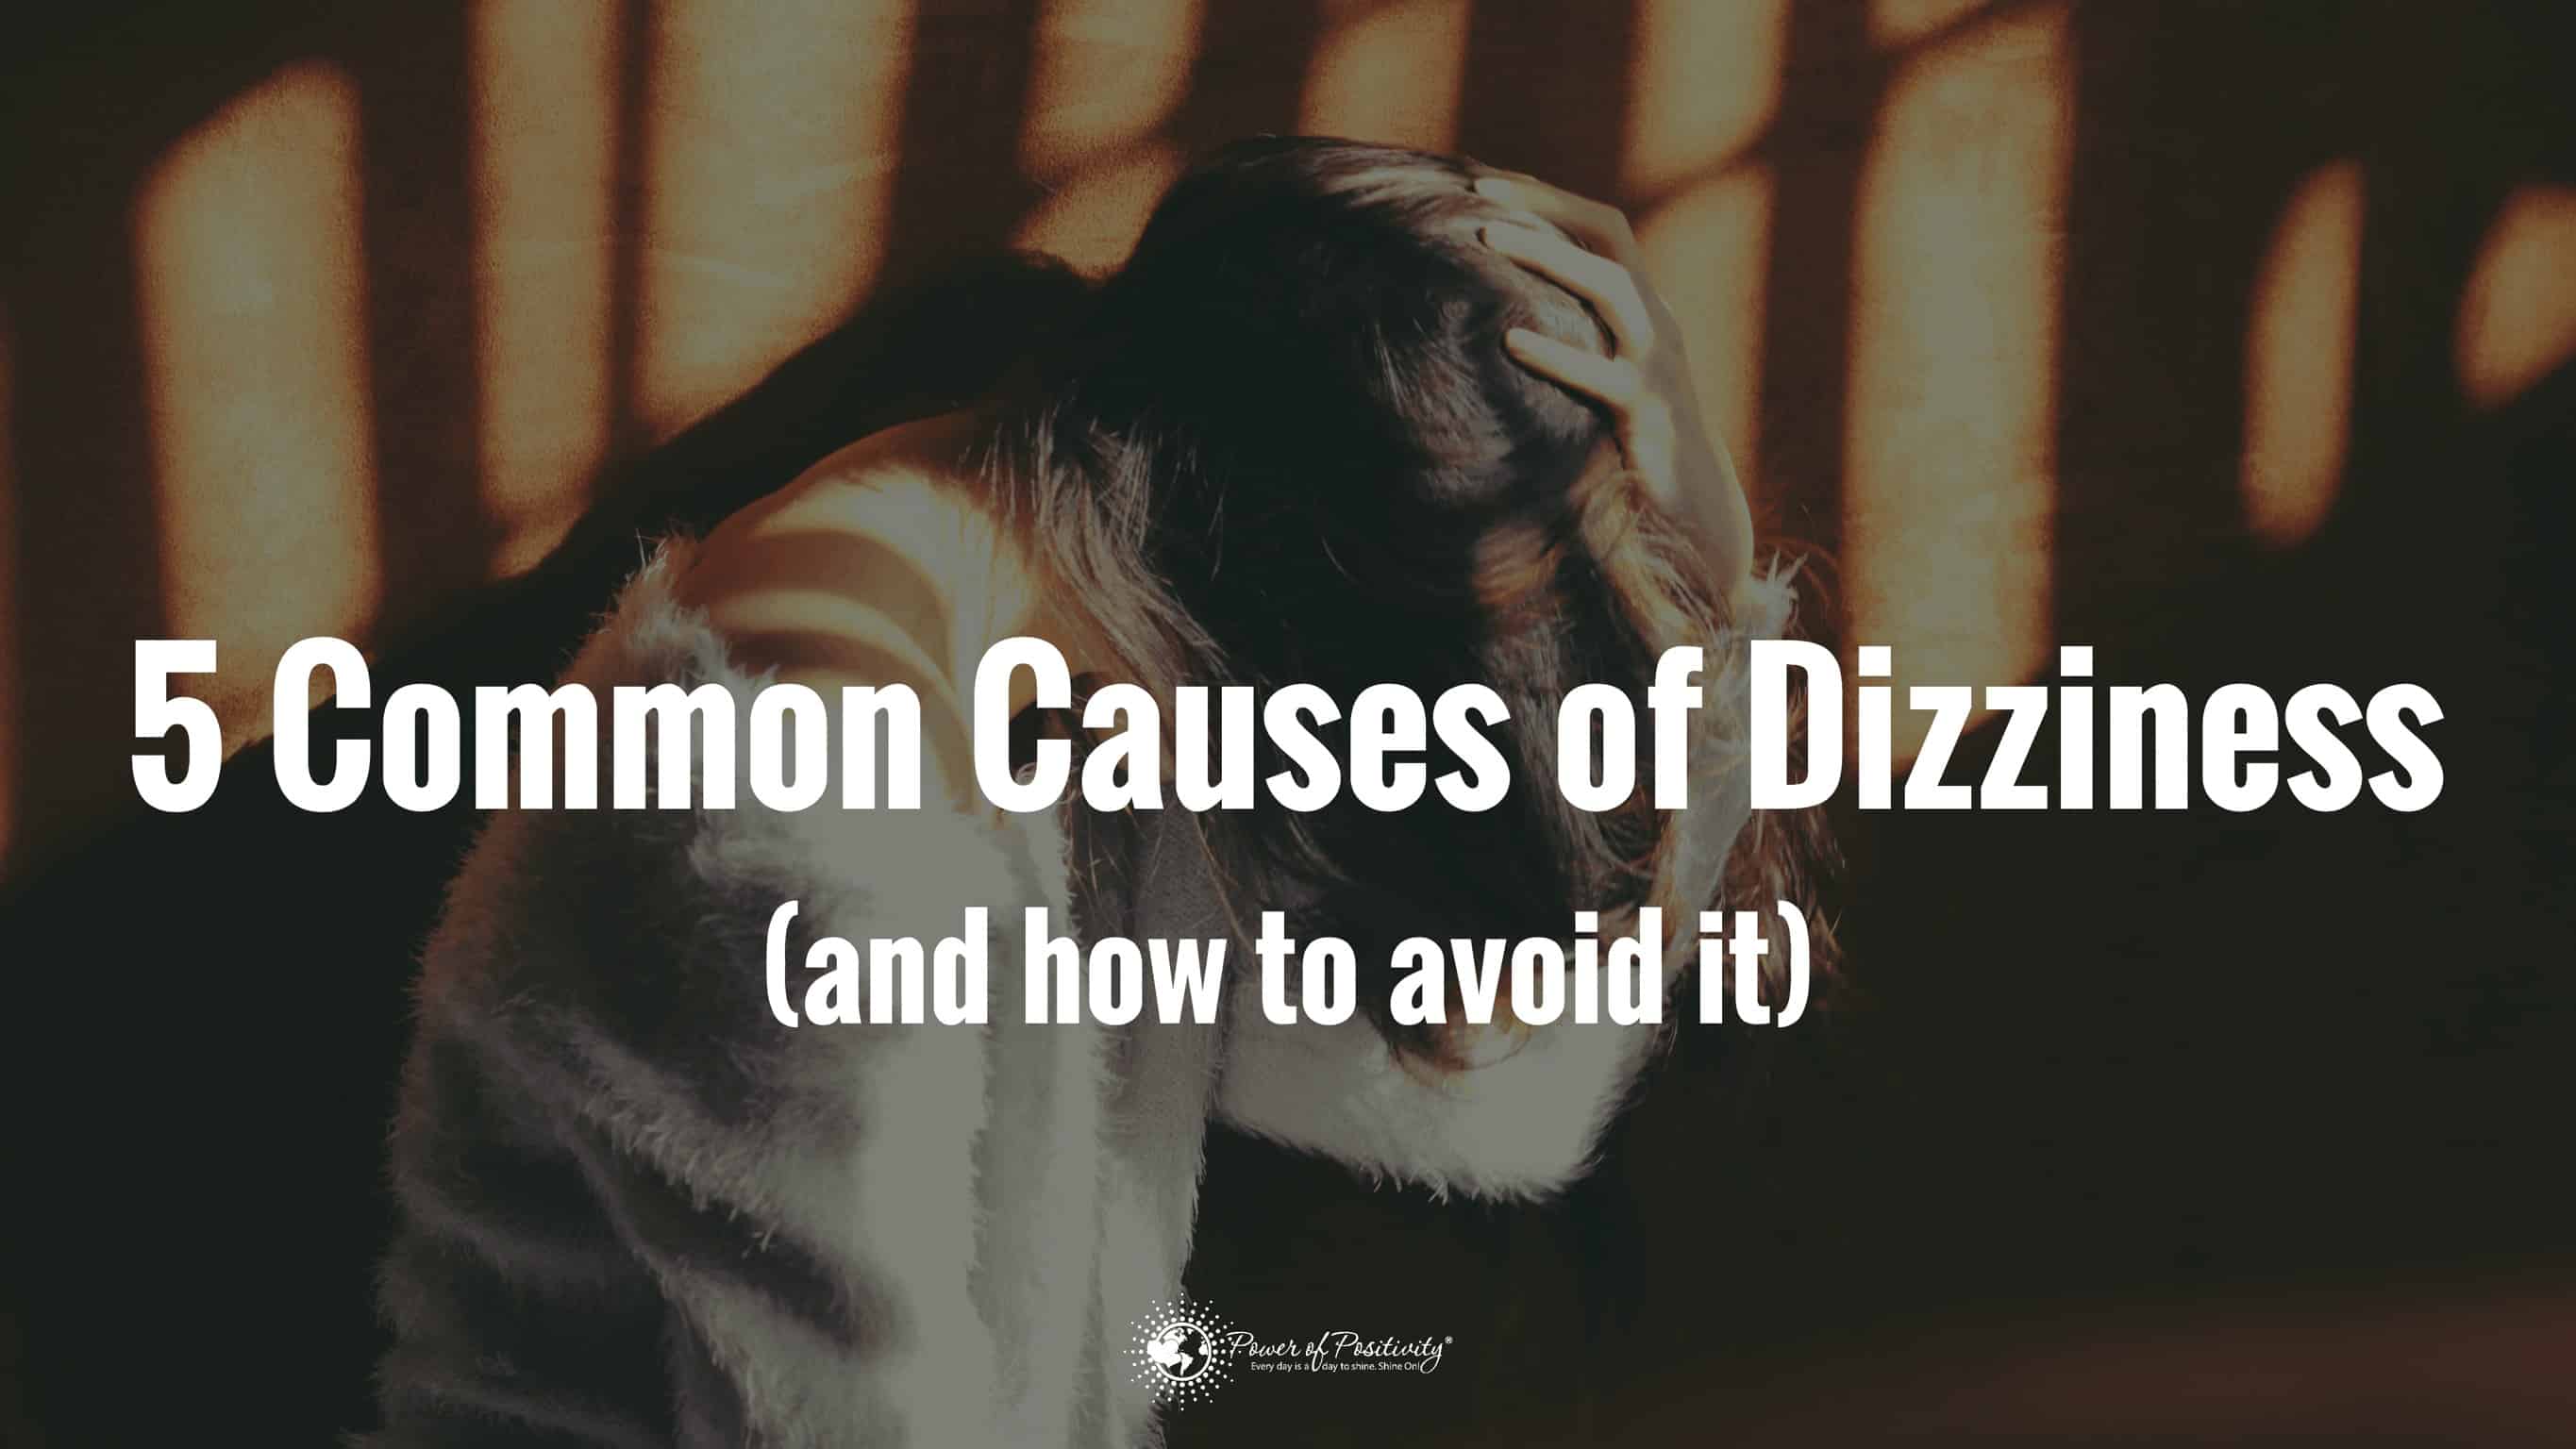 5 Common Causes of Dizziness (And How to Avoid It)